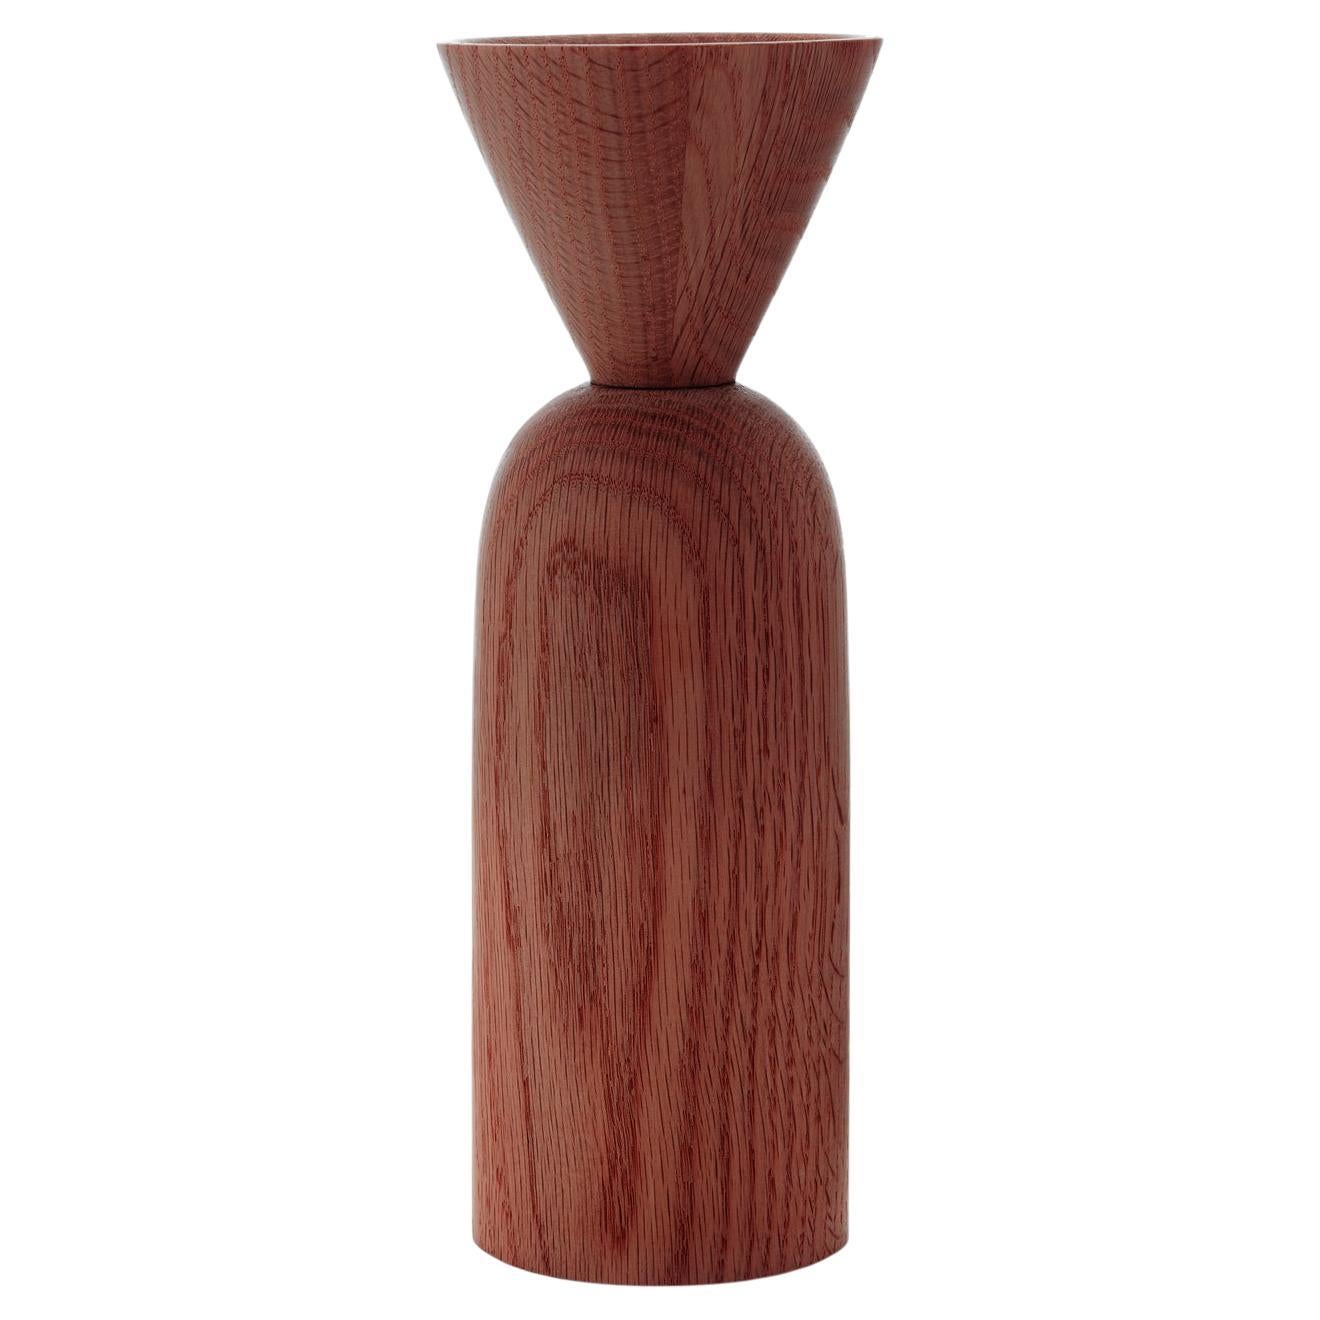 Cone Shape Smoked Oak Vase by Applicata For Sale